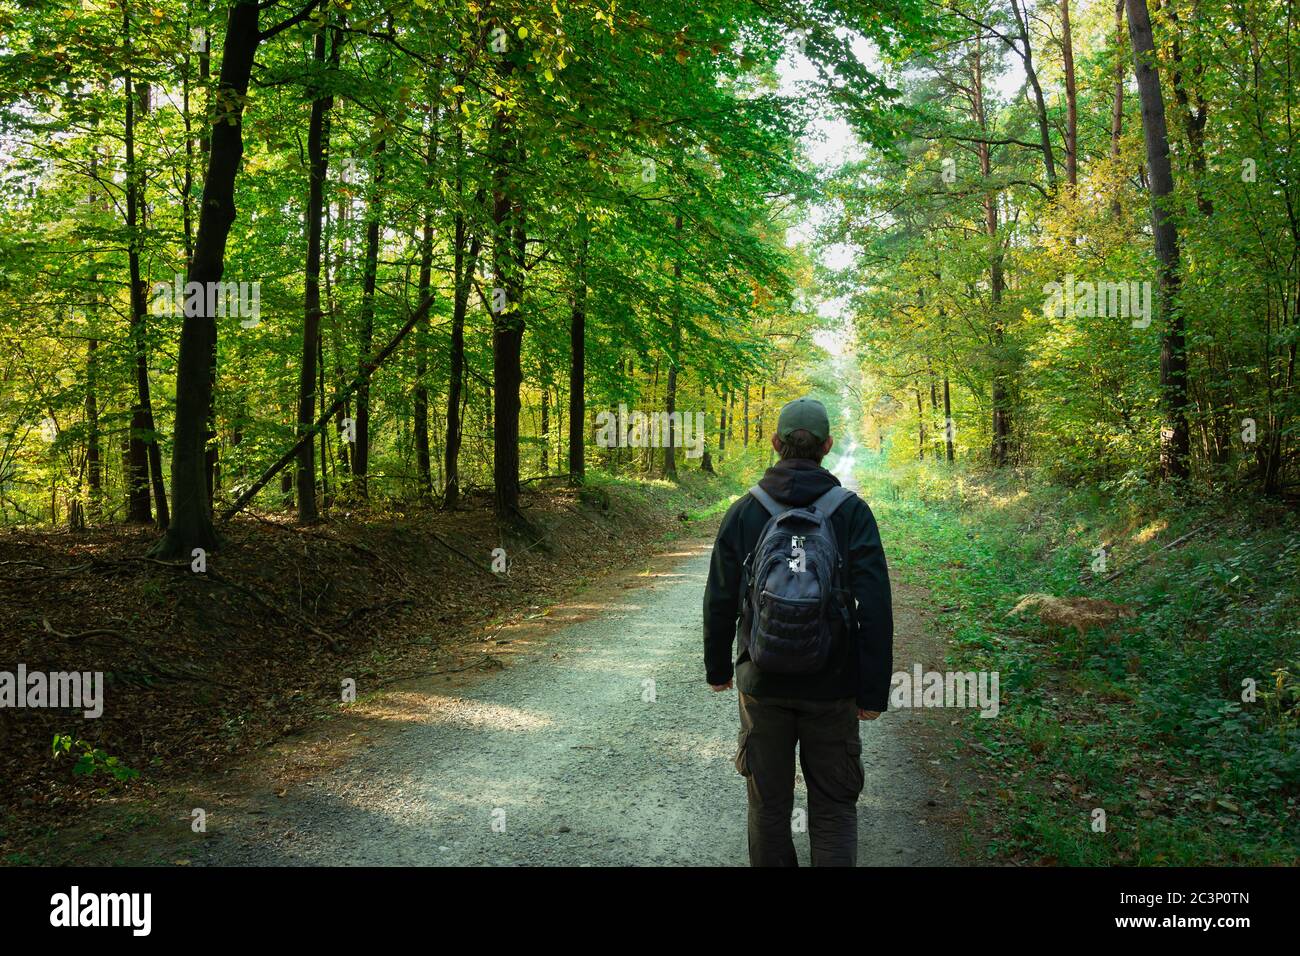 A man with a backpack walking down a forest road, view in sunny day Stock Photo